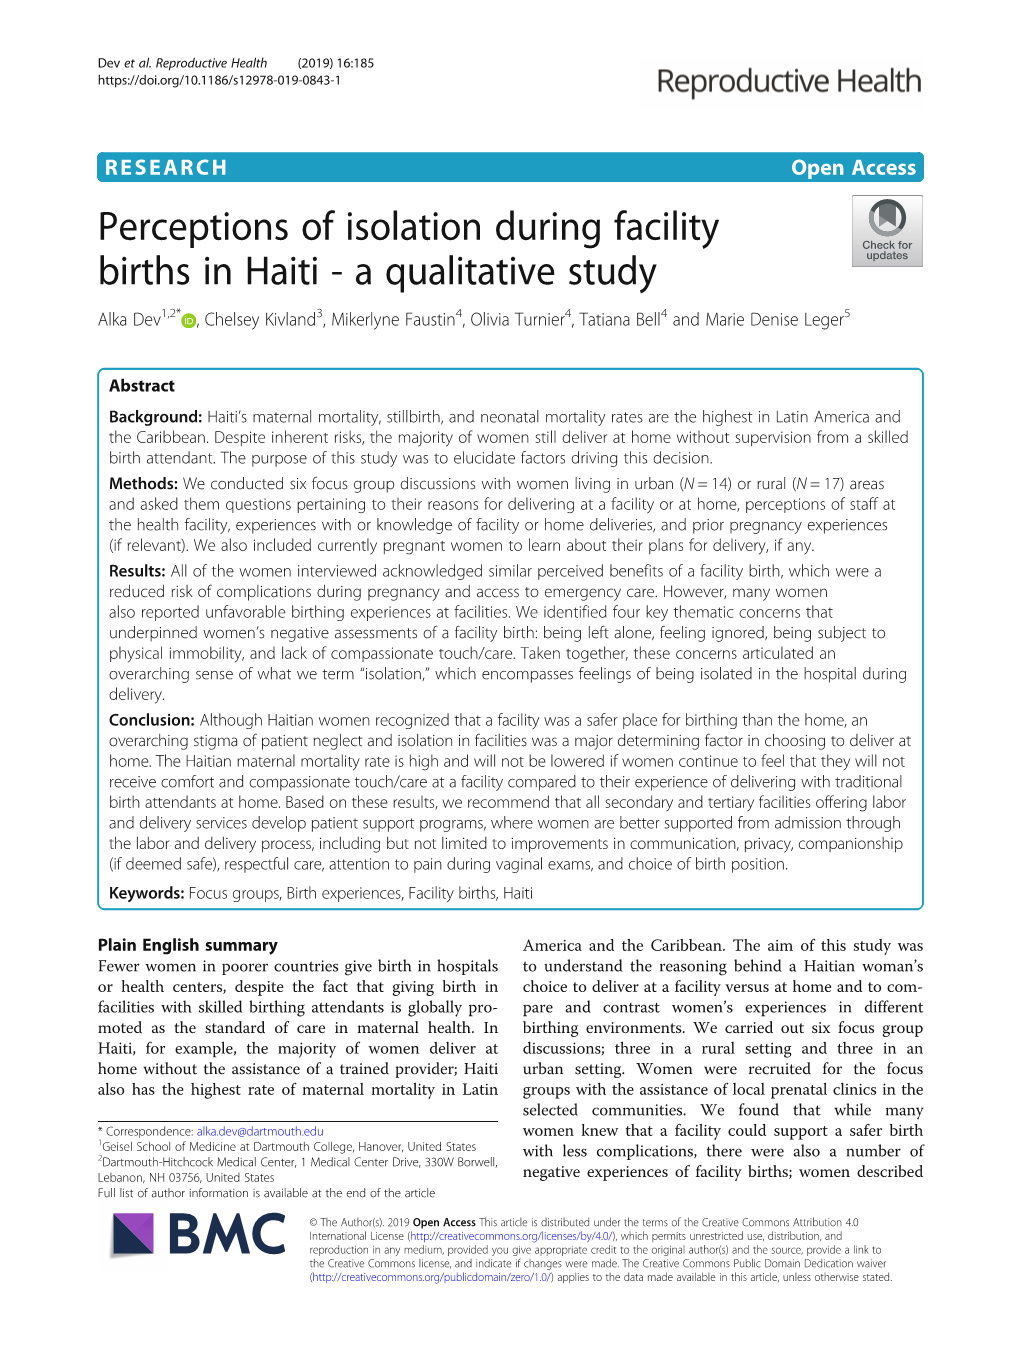 Perceptions of Isolation During Facility Births in Haiti